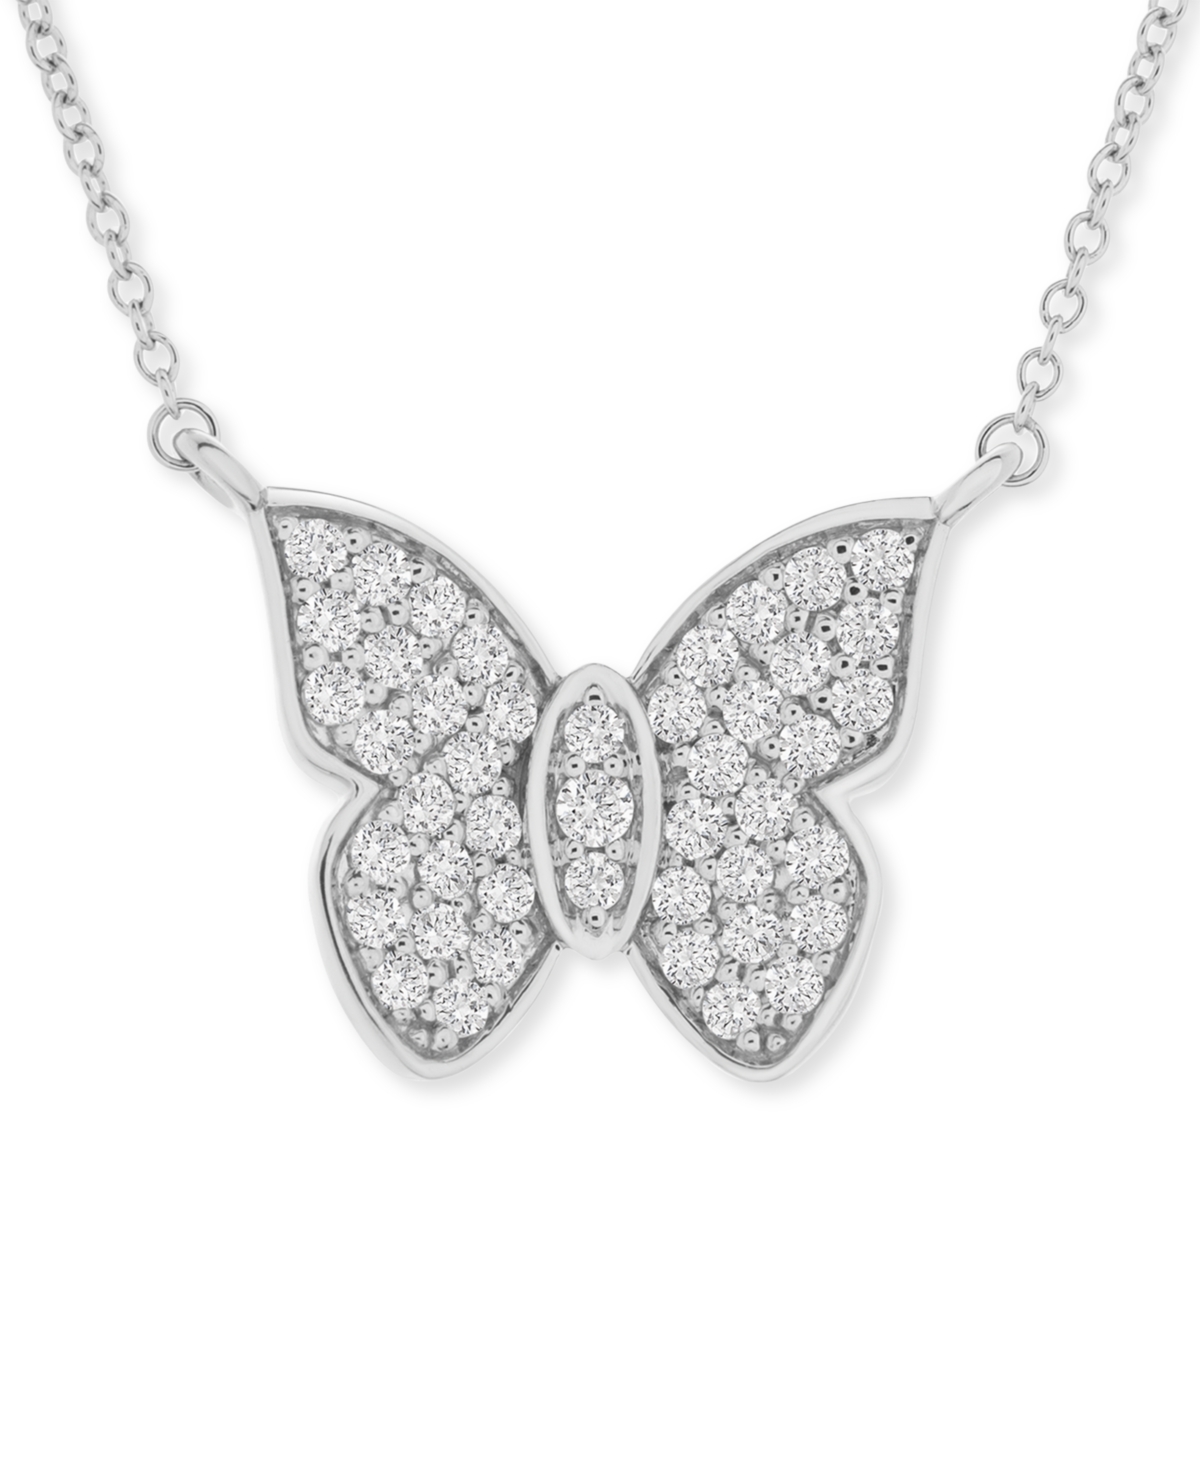 Diamond Butterfly 20" Pendant Necklace (1/2 ct. t.w.) in 14k White Gold, Created for Macy's - White Gold